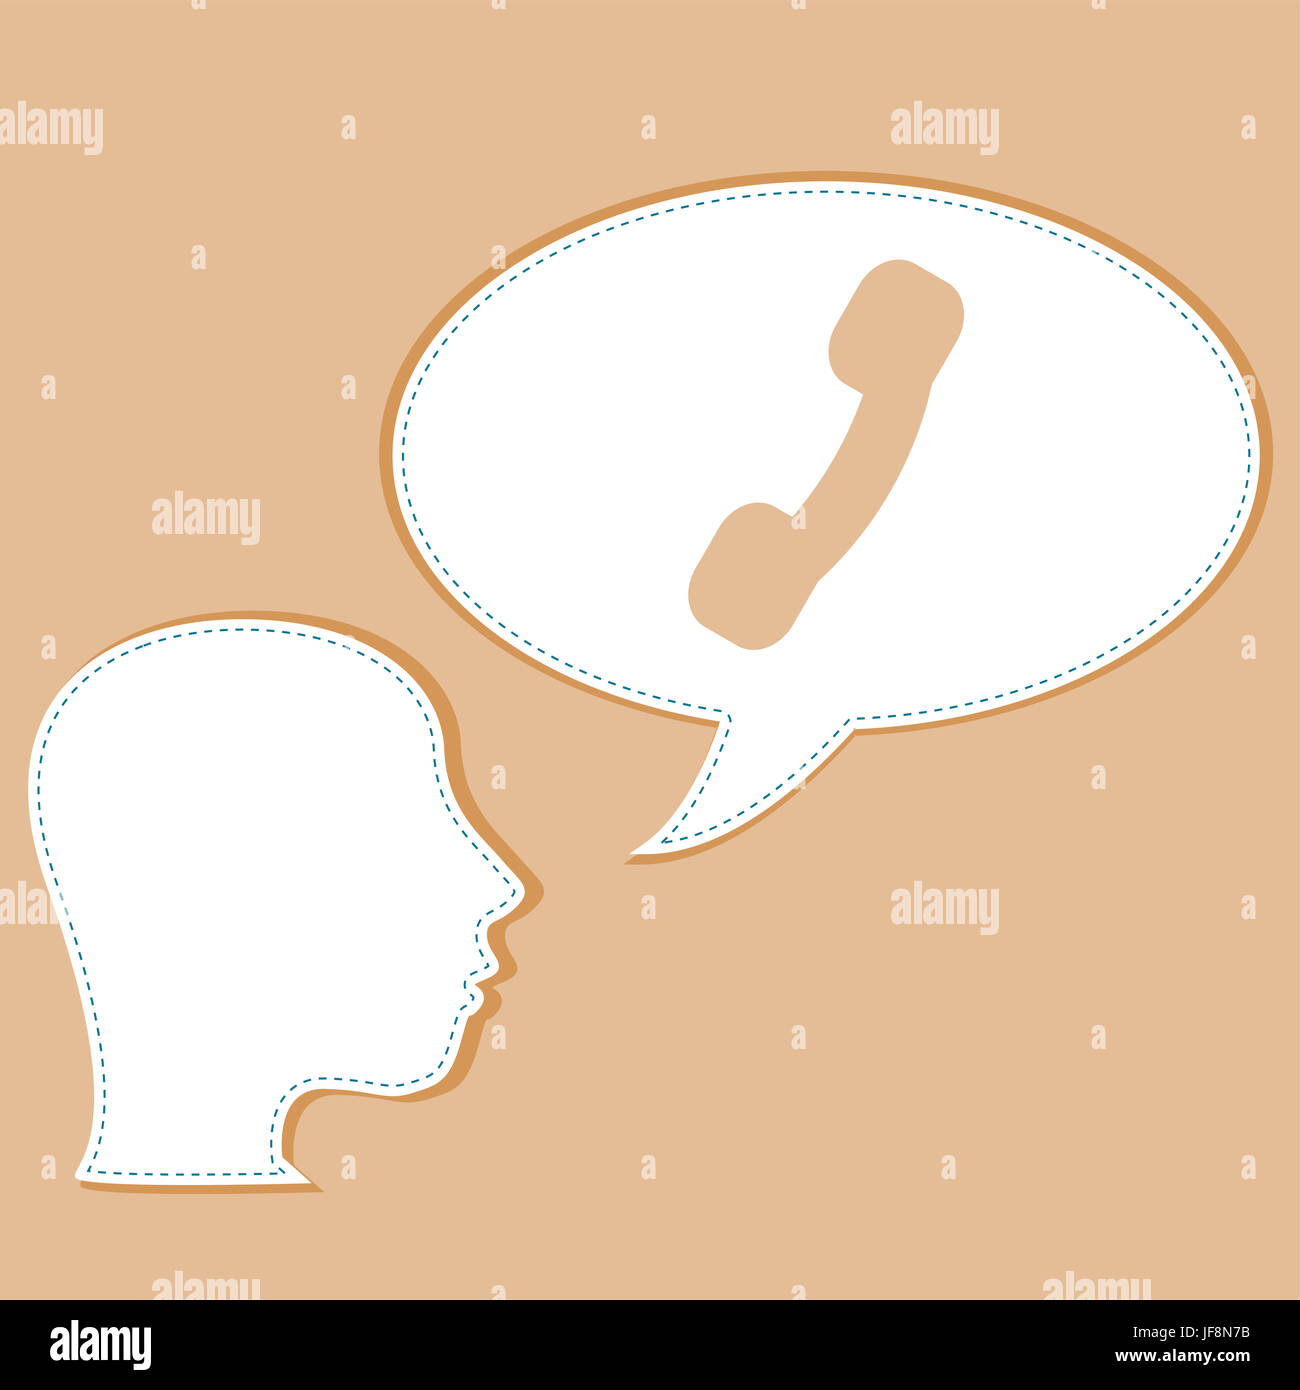 Head and phone handset on speech bubbles Stock Photo